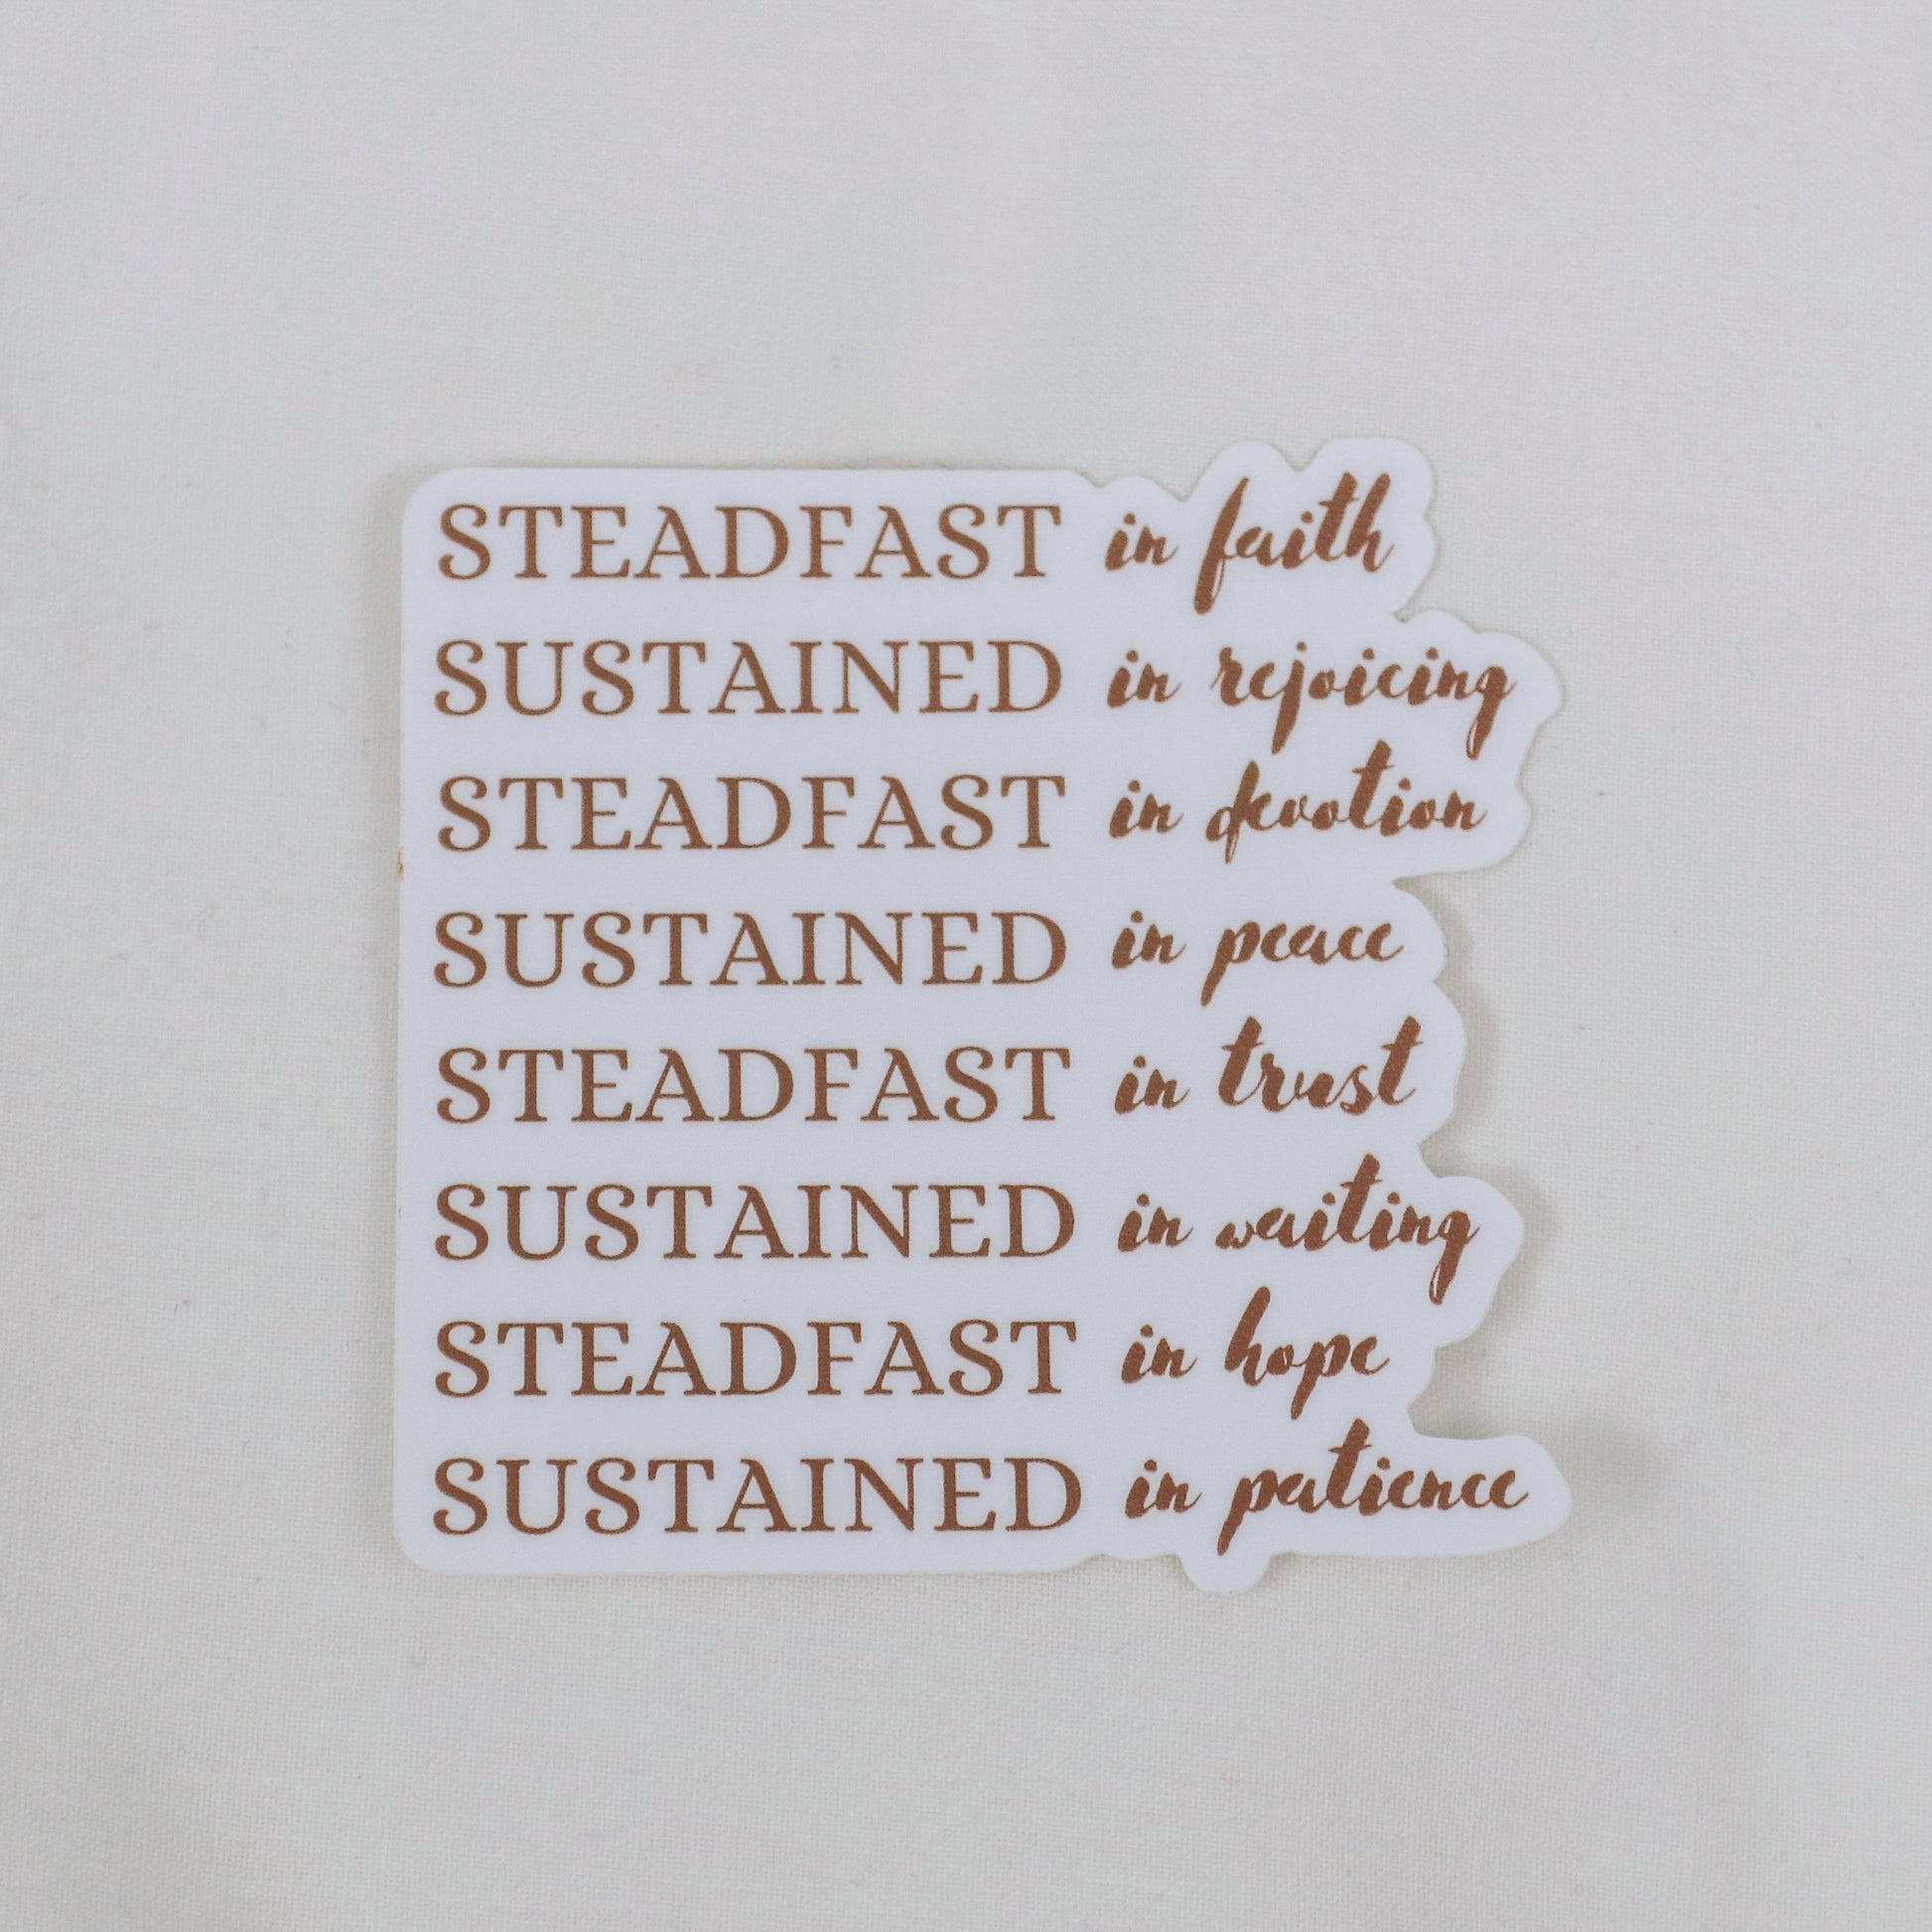 Steadfast and Sustained Sticker - Steadfast and Sustained